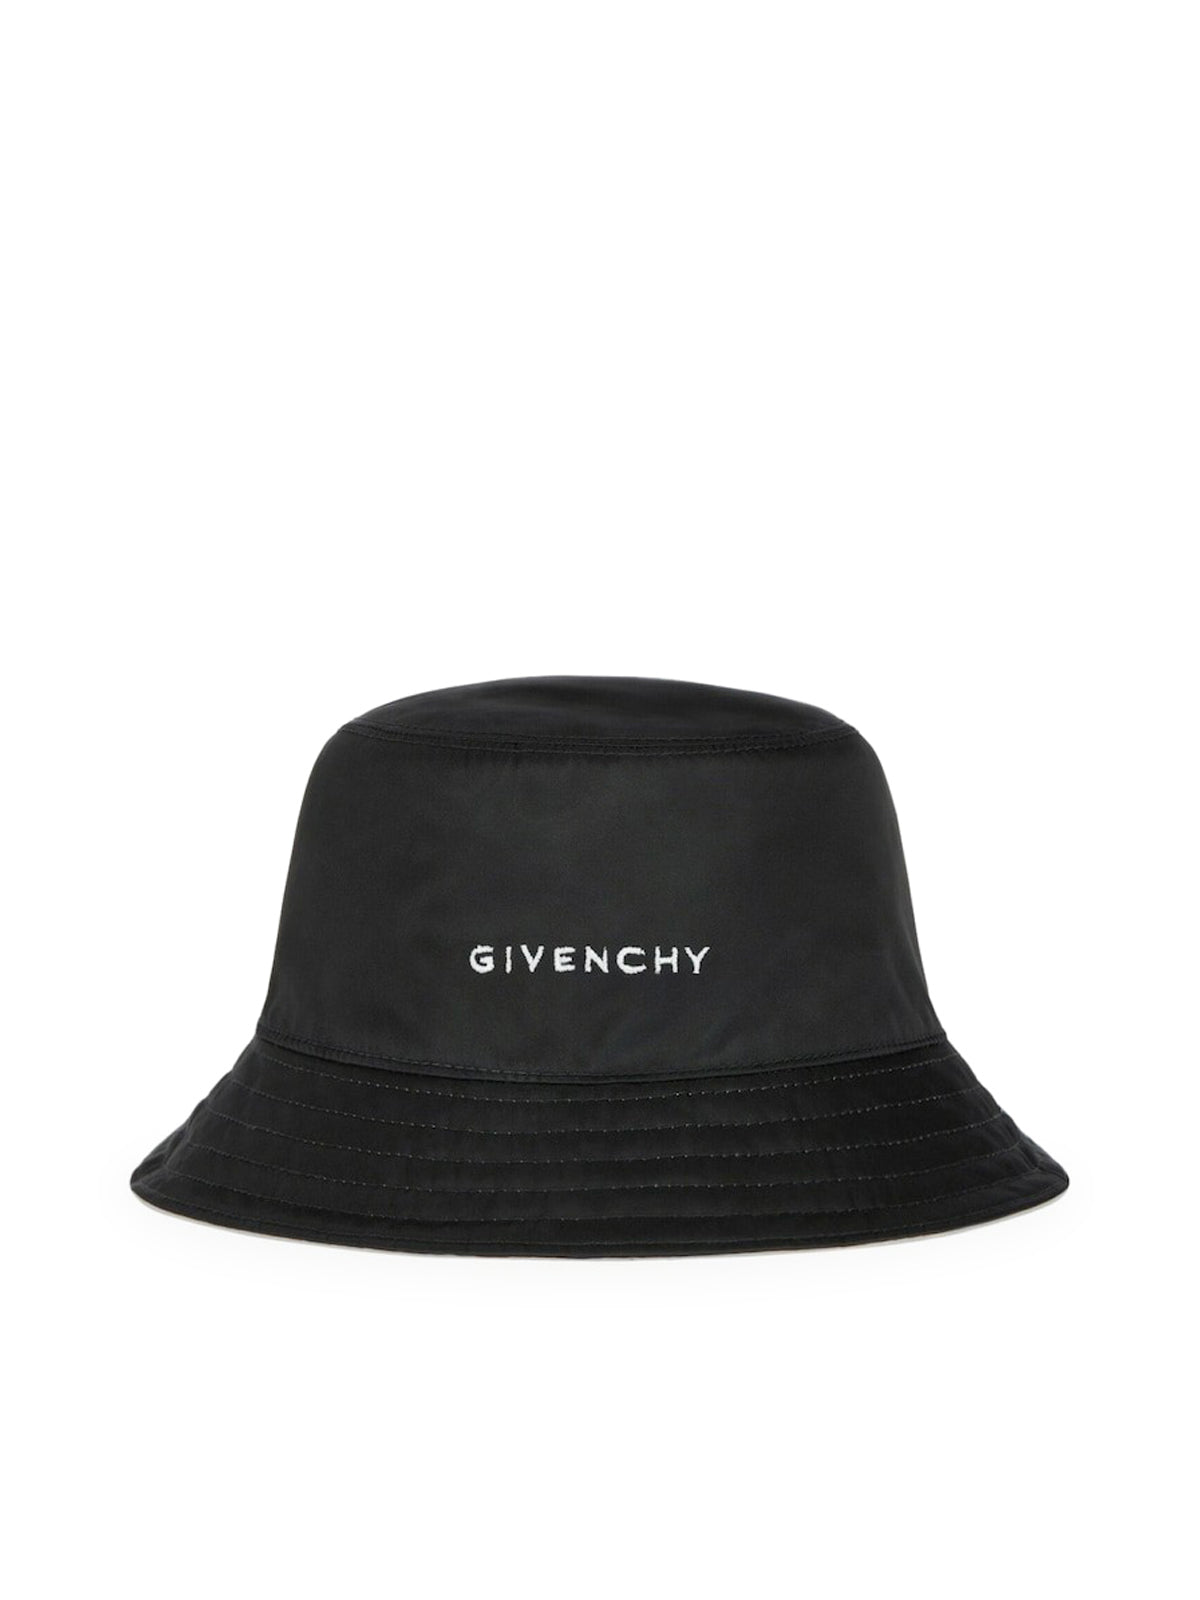 GIVENCHY bucket hat